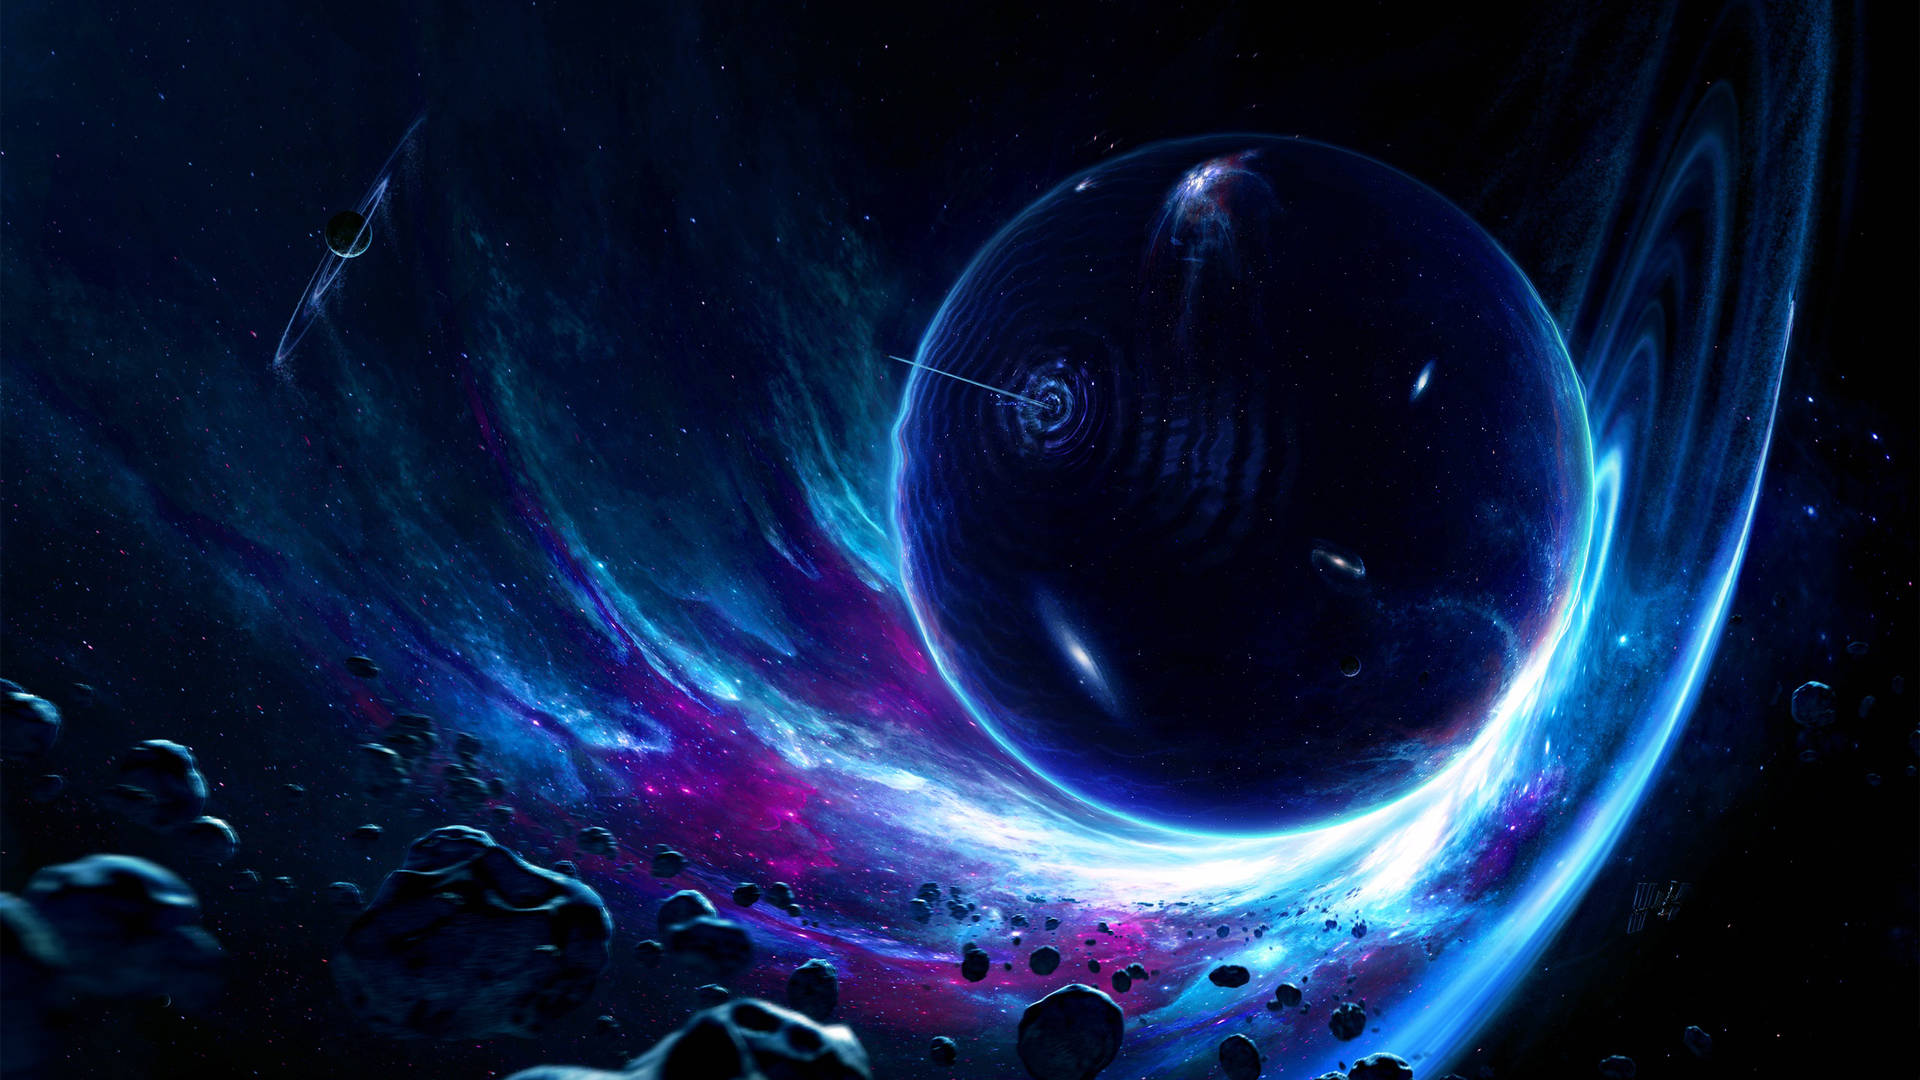 Black Hole In Space 2560x1440 Wallpaper